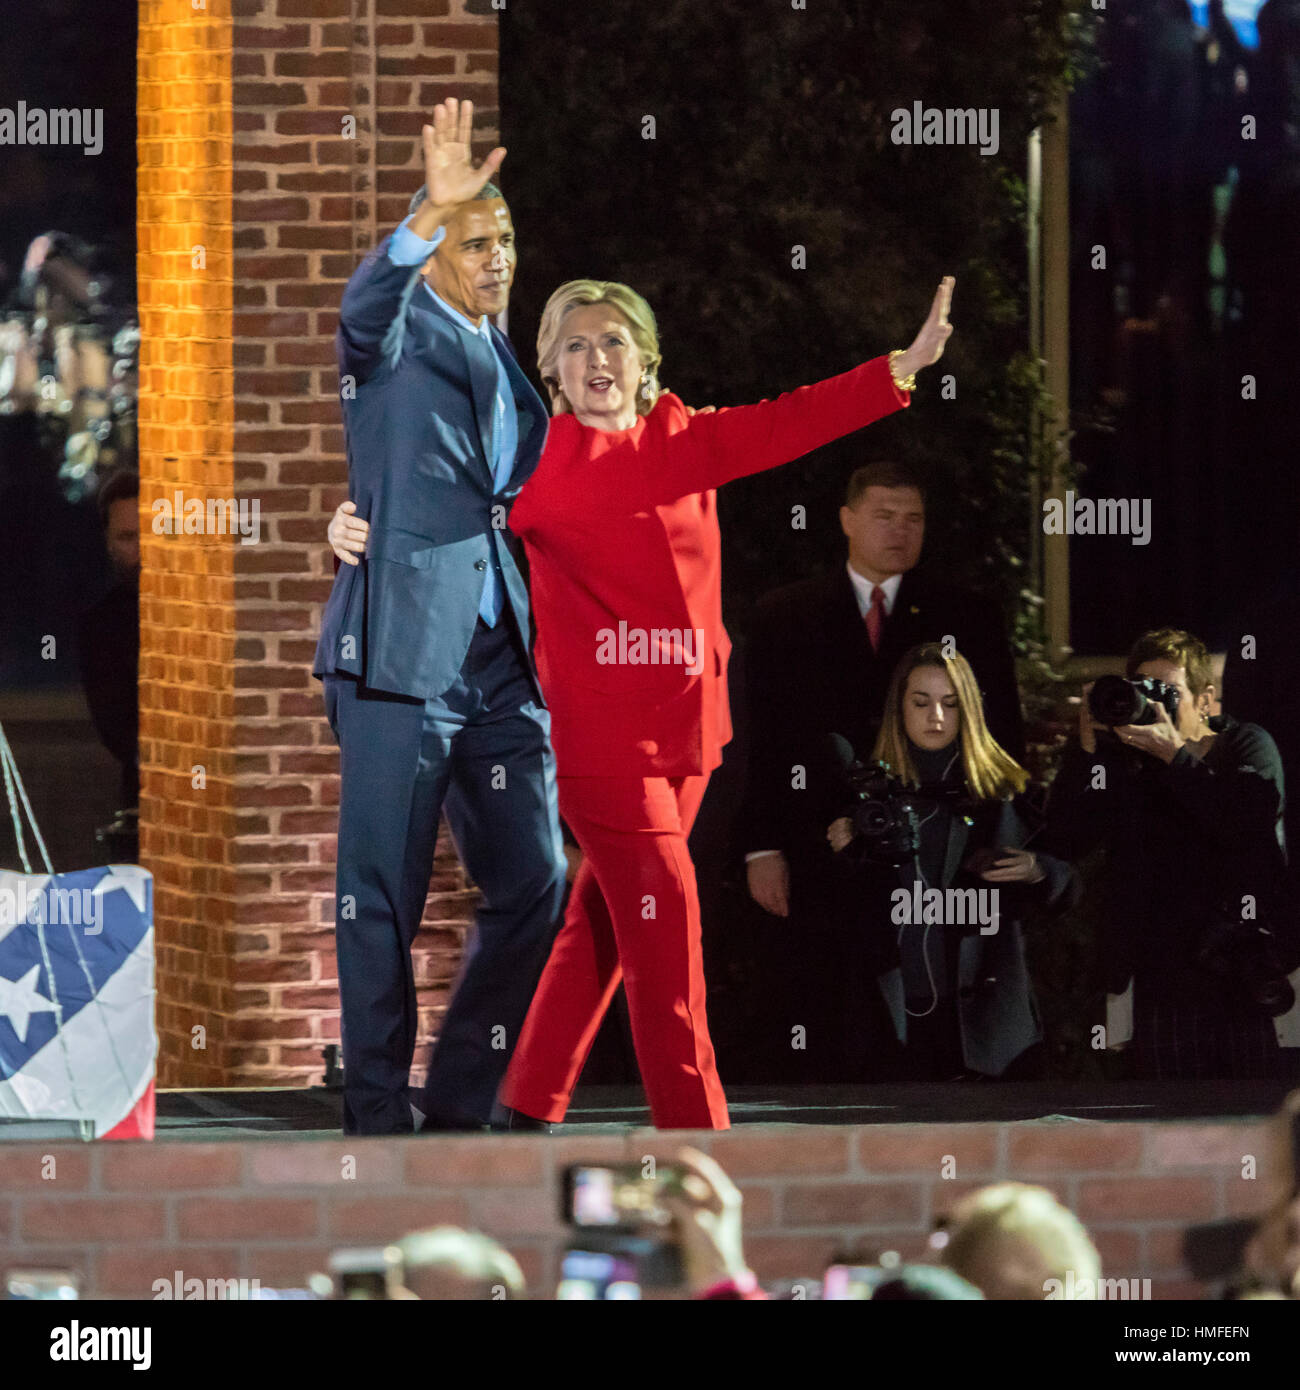 NOVEMBER 7, 2016, INDEPENDENCE HALL, PHIL., PA - President Obama and Democratic Presidential Candidate Hillary Clinton Hold Election Eve Get Out The Vote Rally, Independence Hall, Phil., PA Stock Photo